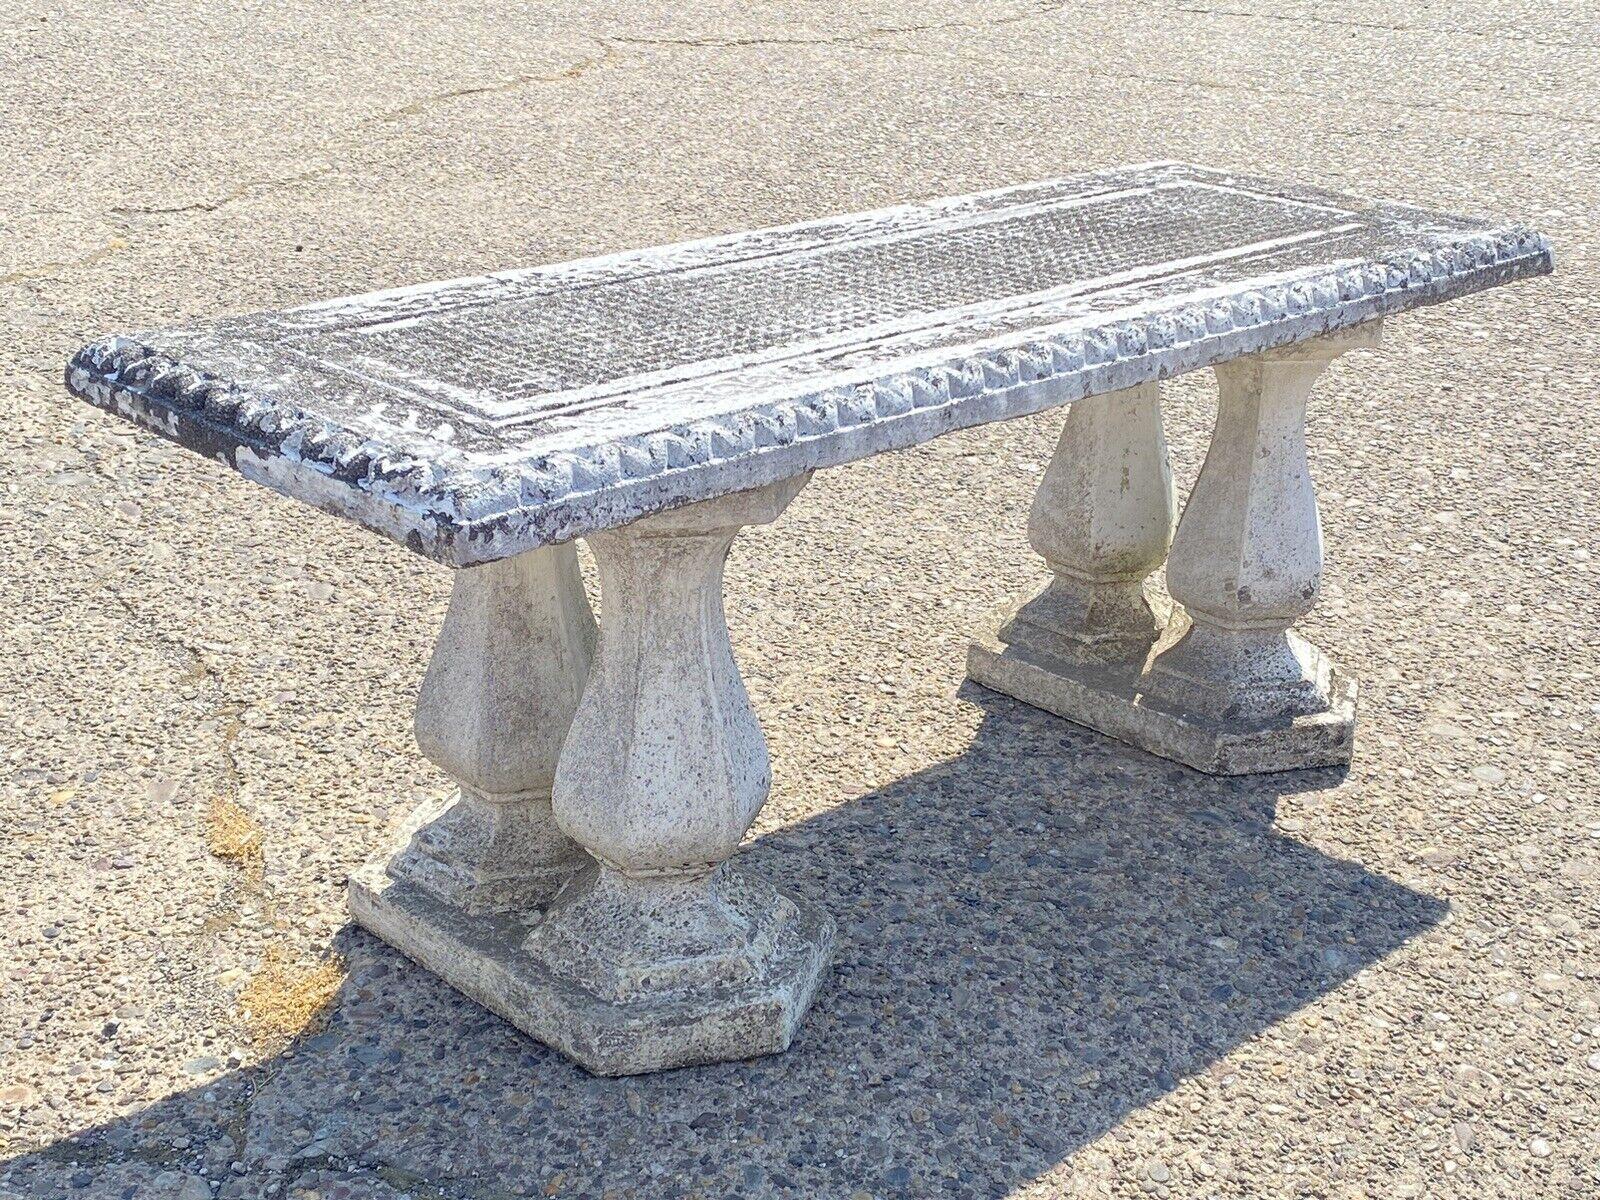 Vintage Classical Concrete Cement Double Baluster Outdoor Garden Bench Pedestals. Item features 2 concrete double baluster pedestals for a garden bench seat. Seat is not included. Example of the completed bench can be seen in image #2. Circa Mid to